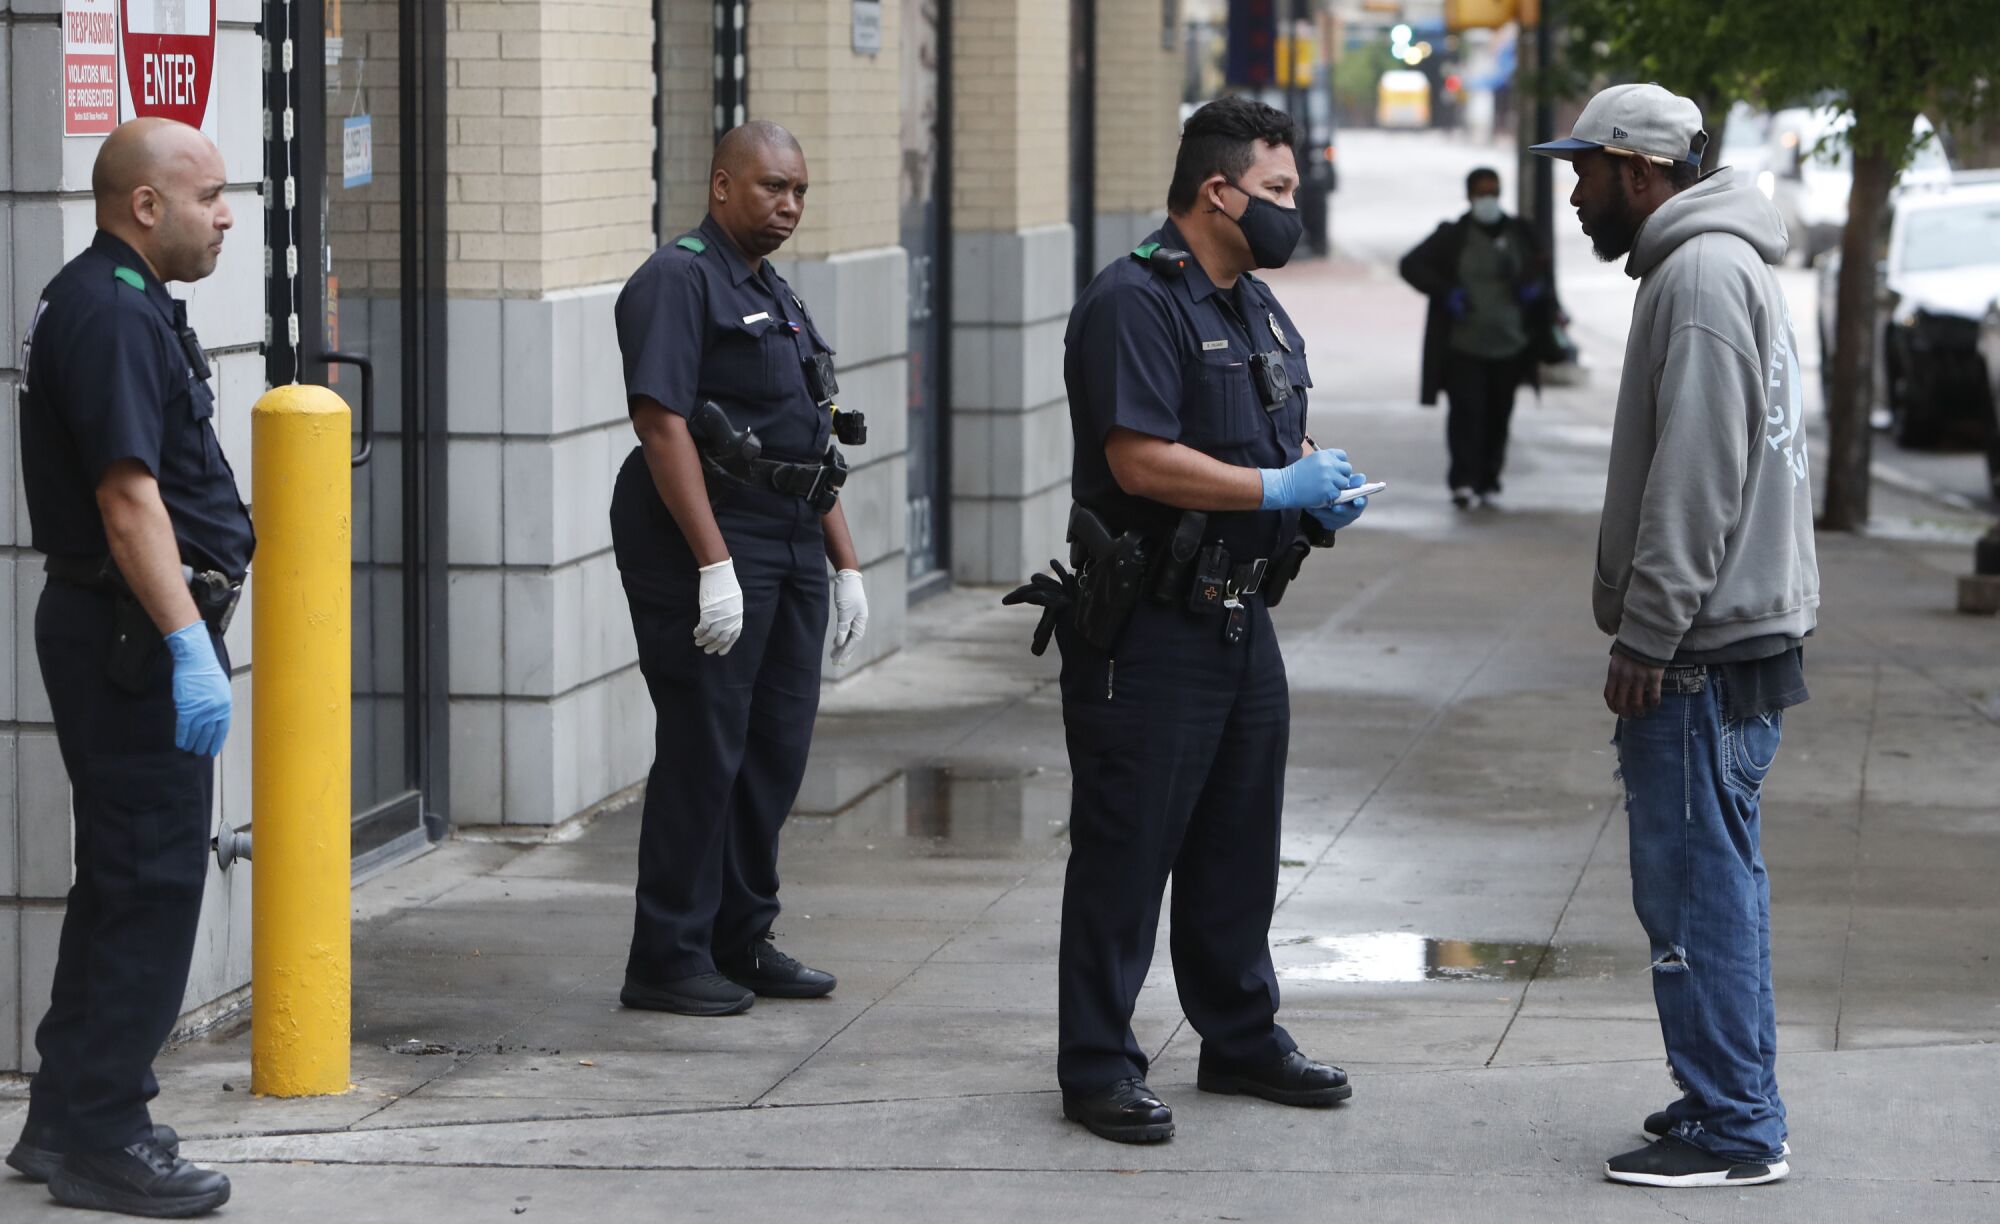 TEXAS: Practicing social distancing amid coronavirus concerns, police officers speak with a man in downtown Dallas.